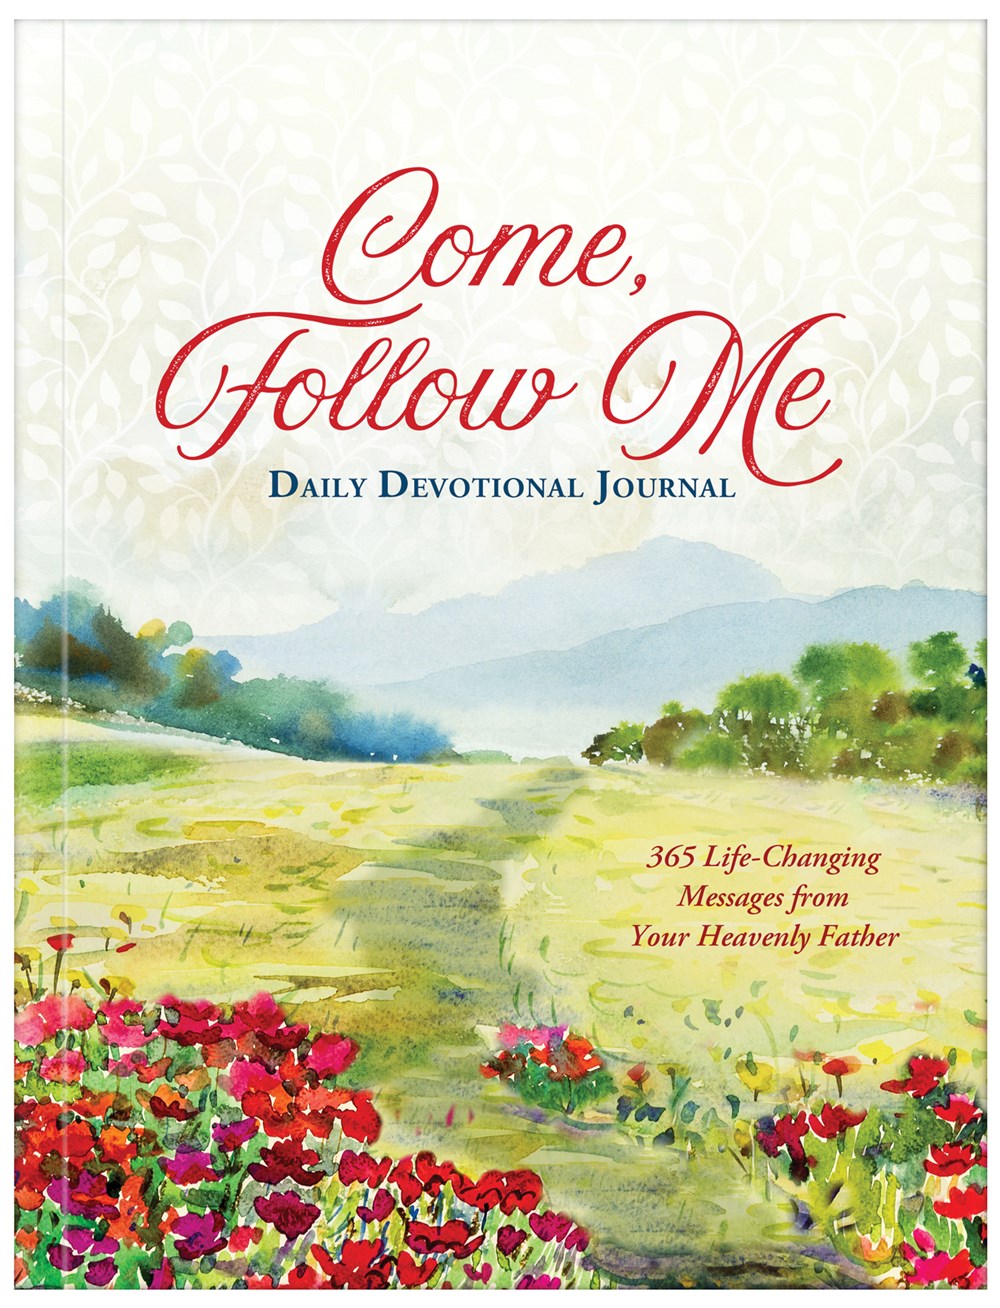 Come, Follow Me Daily Devotional Journal - The Christian Gift Company